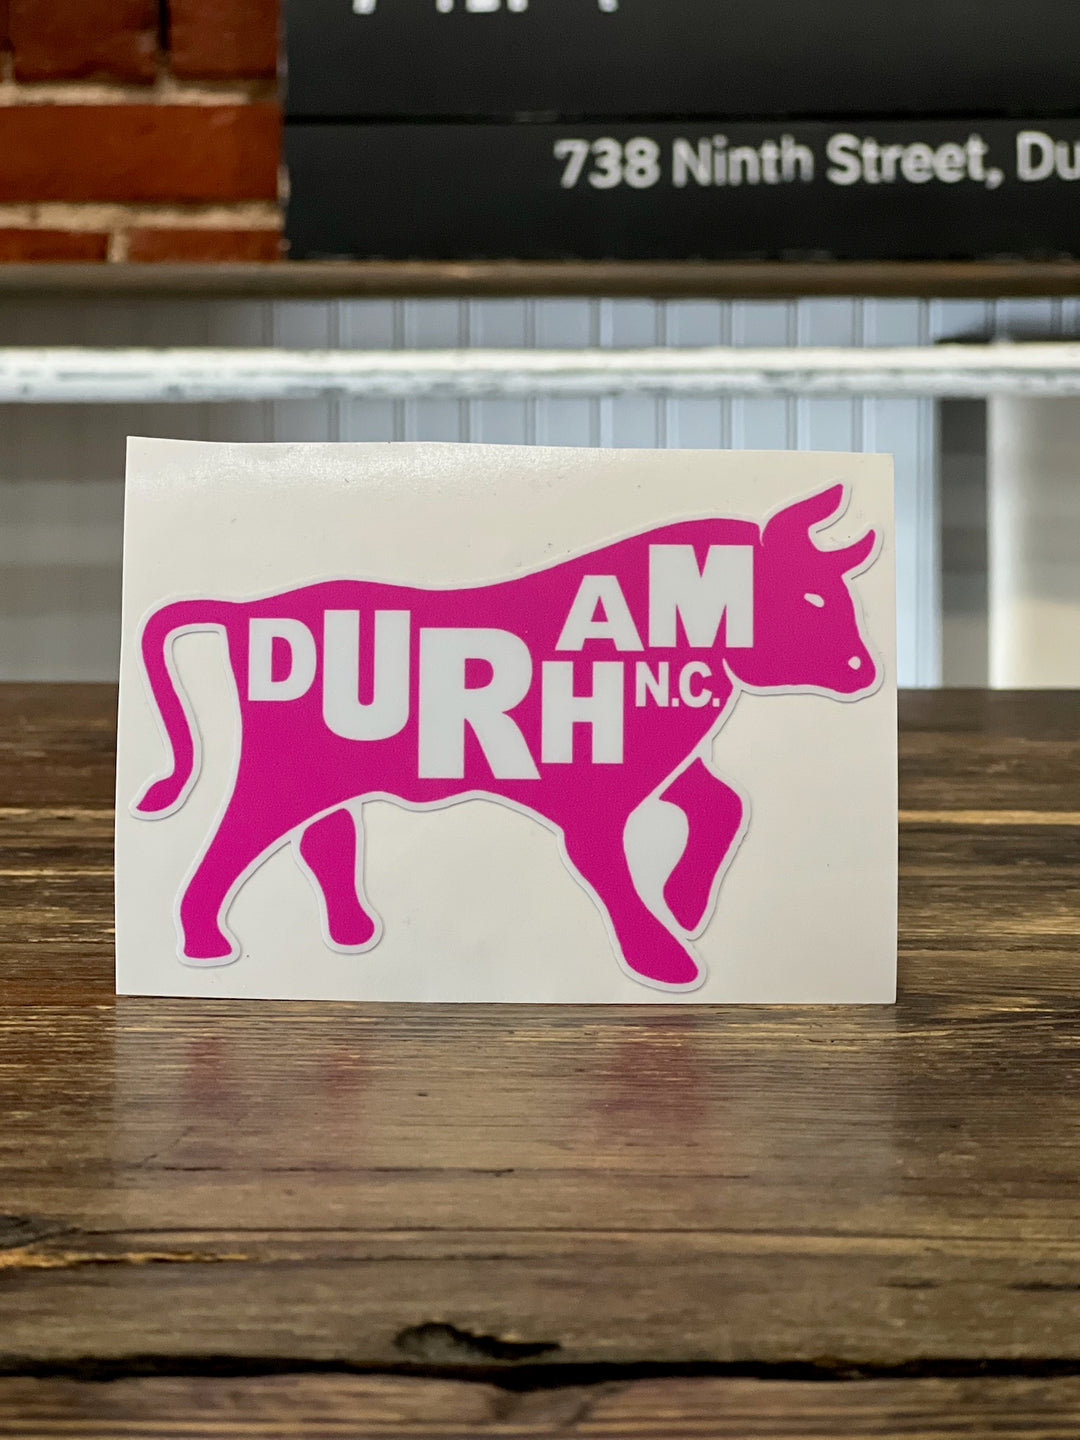 Bull with Durham, NC. Decal #5